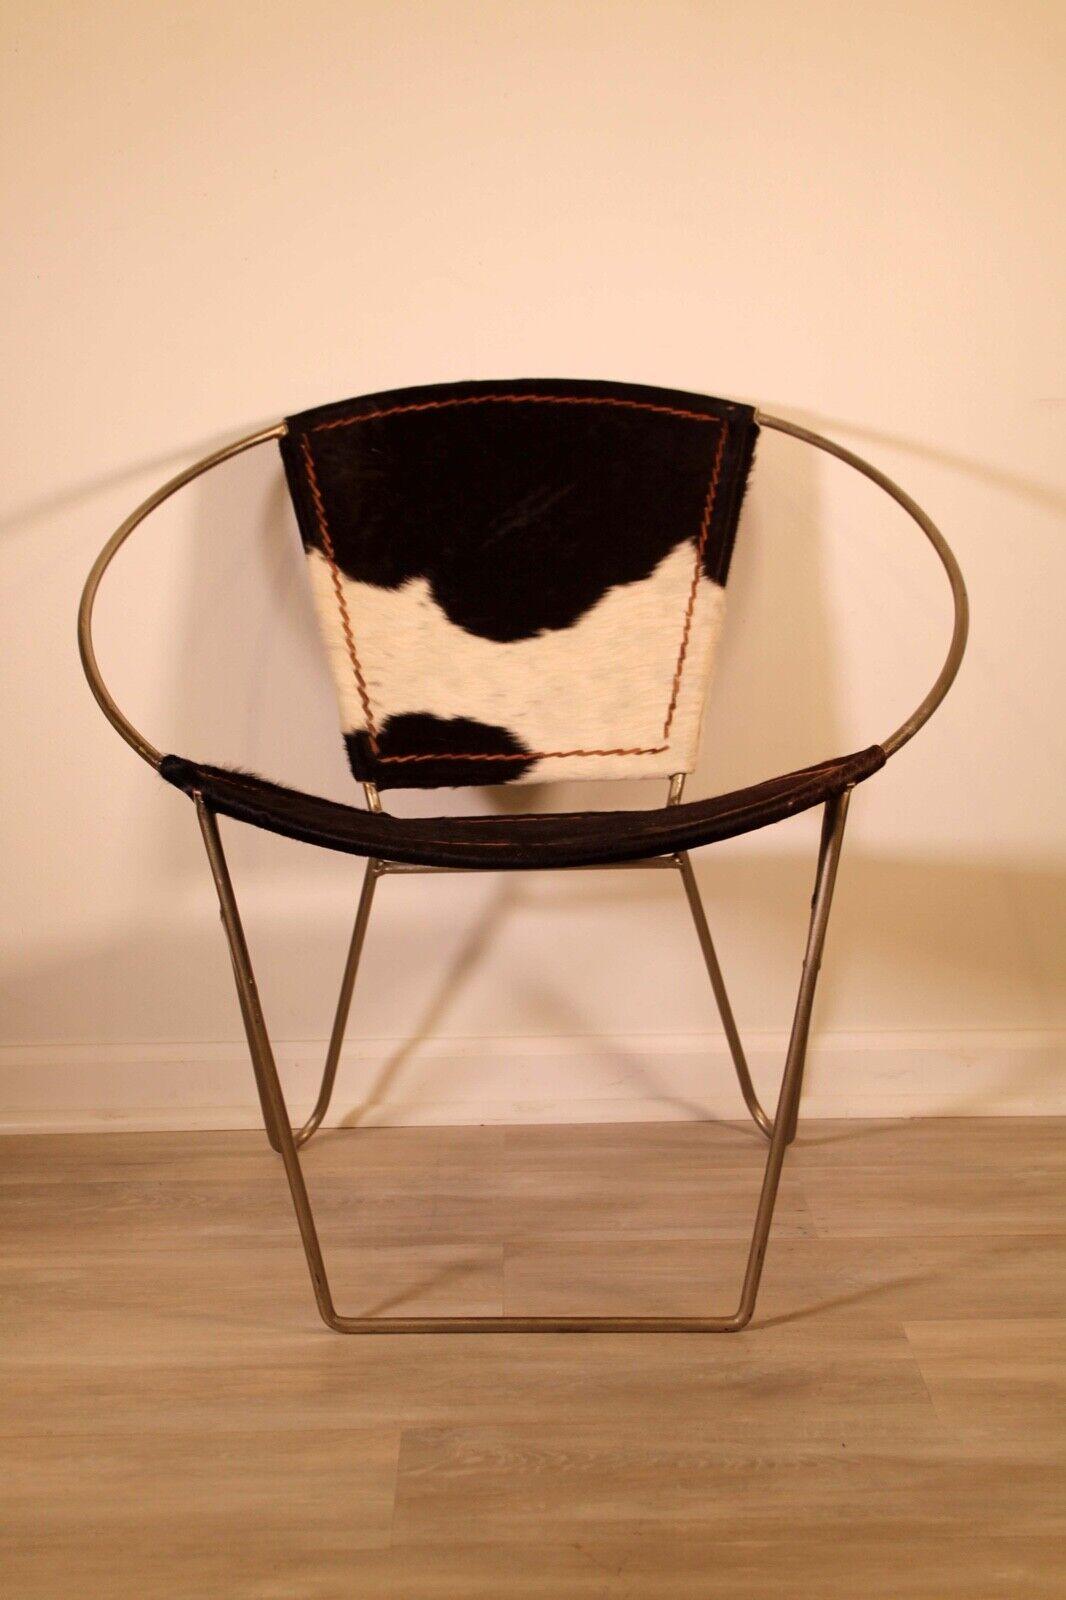 A sophisticated animal hide hoop chair. Iron material used for backbone of the chair. In very good condition. Dimensions: 30